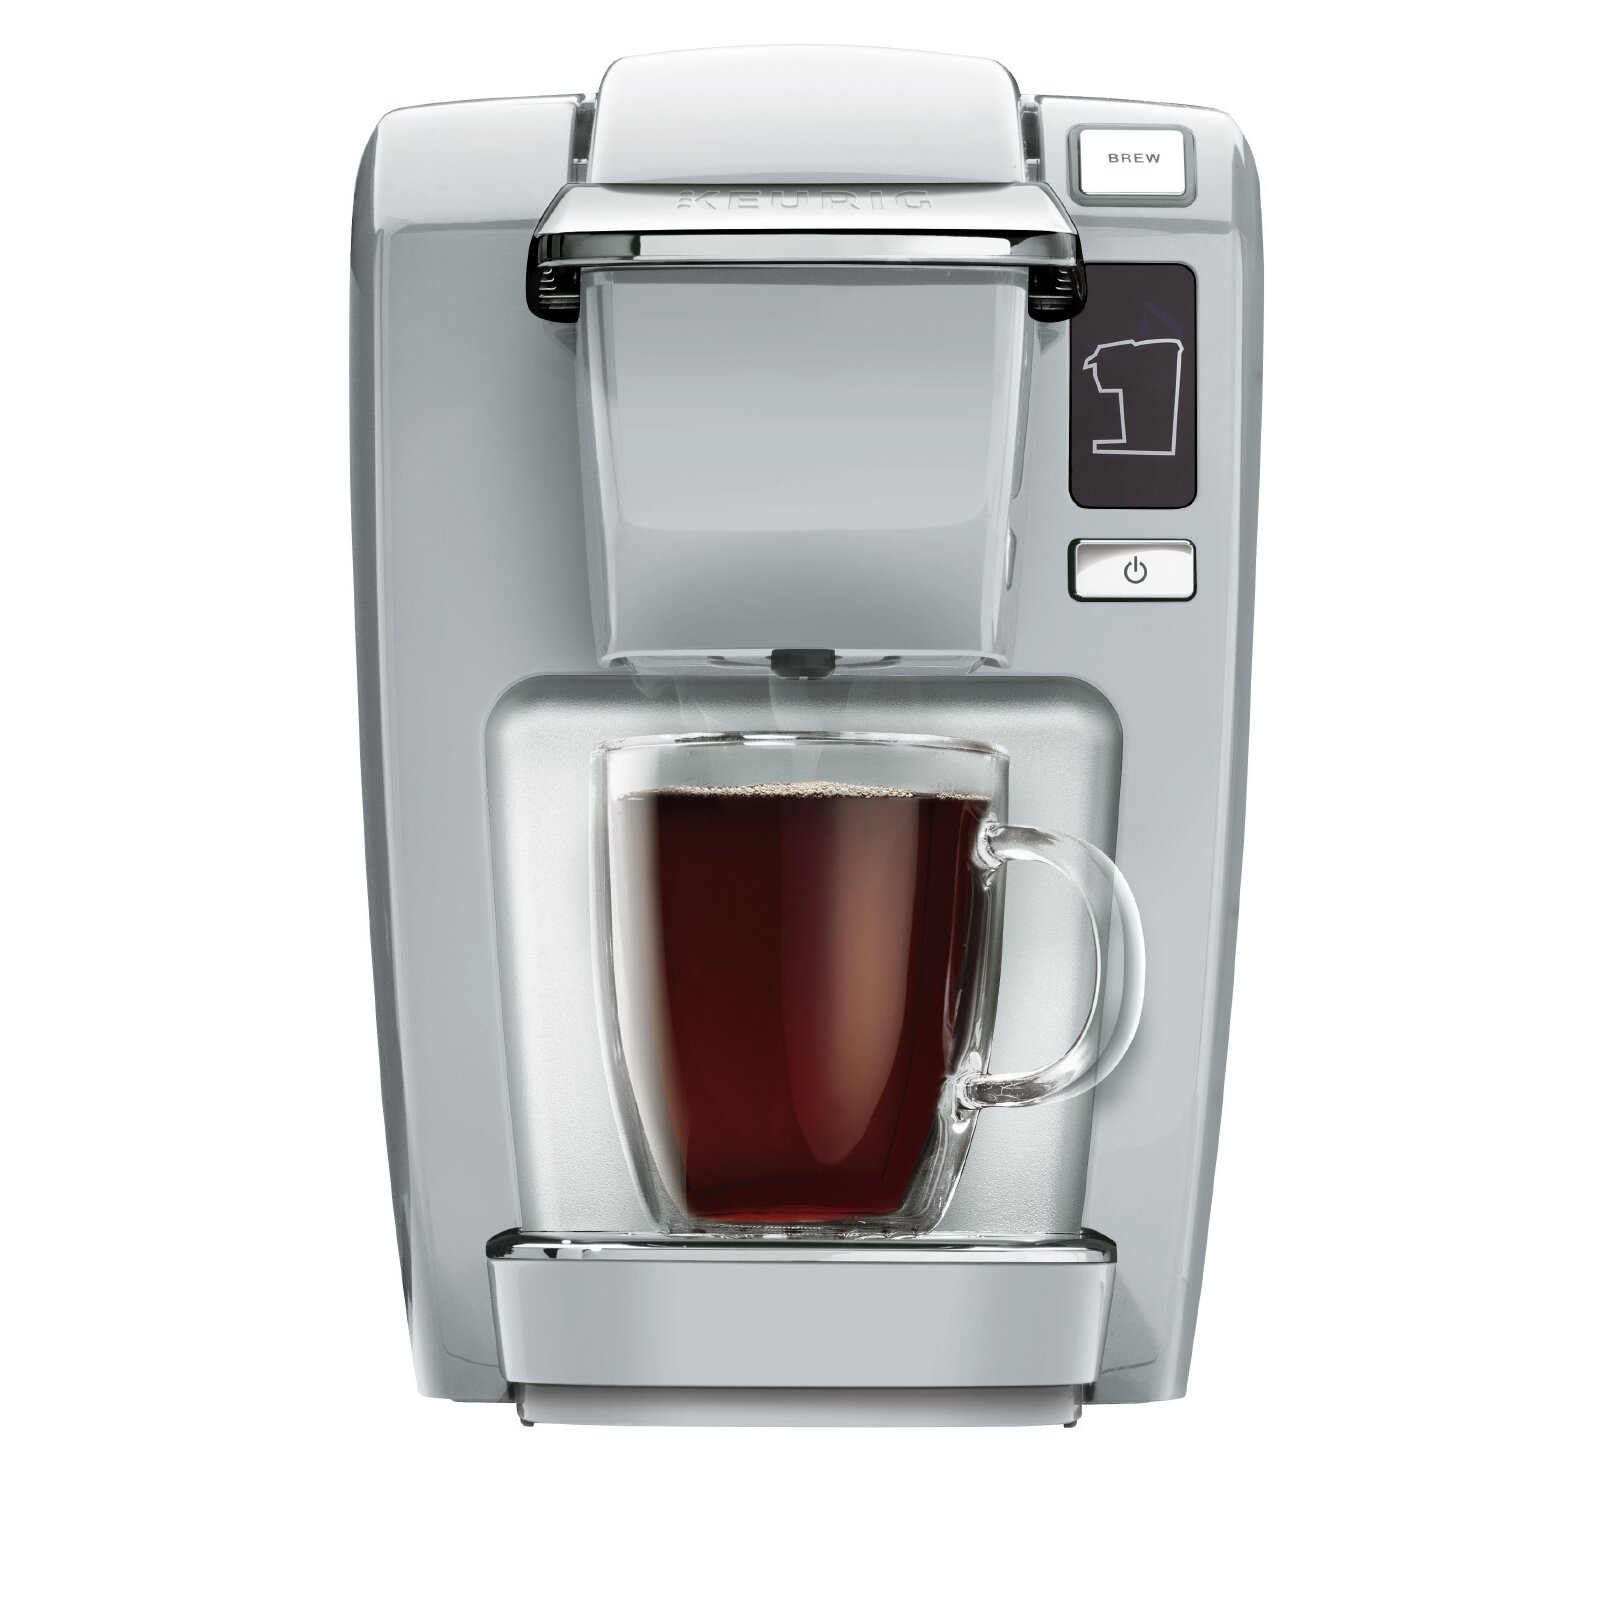 Which is the best rated Keurig coffee maker?